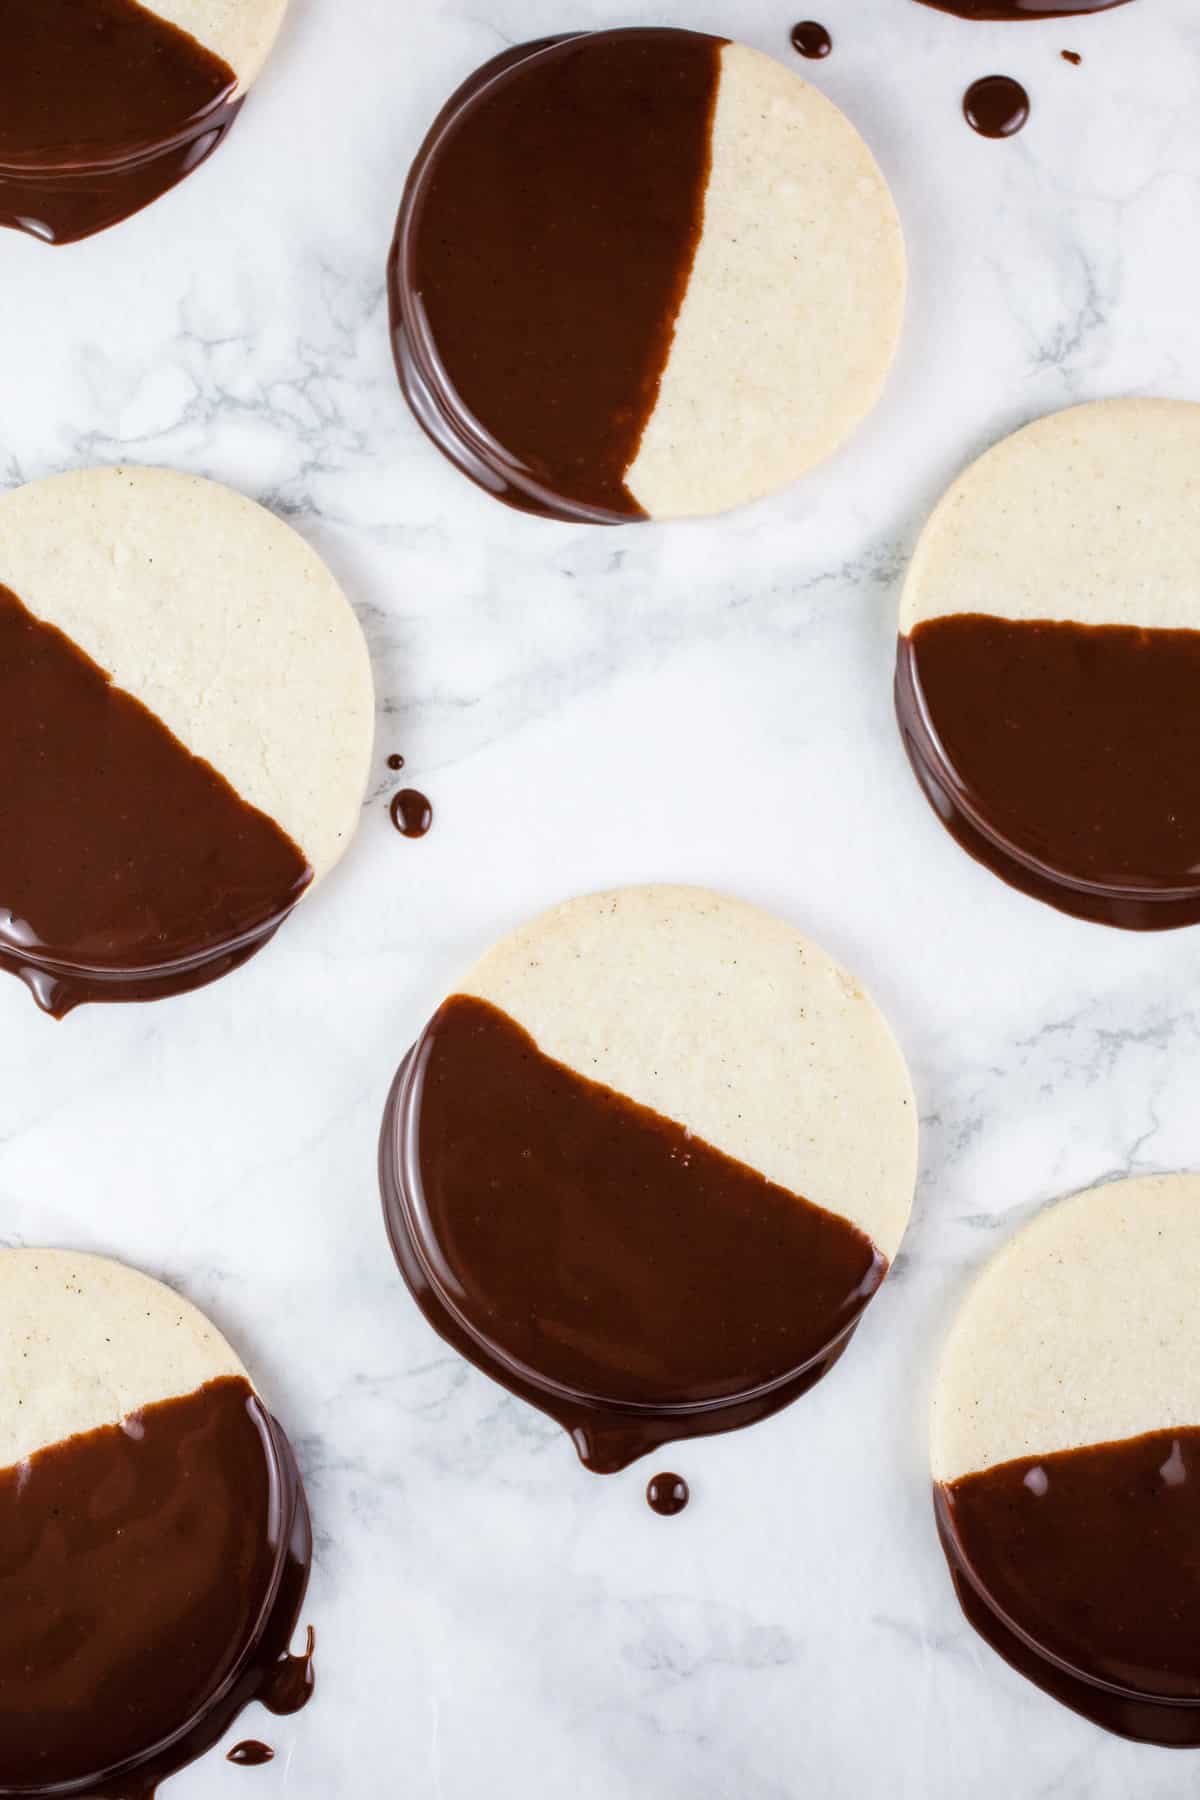 Shortbread cookies dipped in chocolate ganache on white surface.